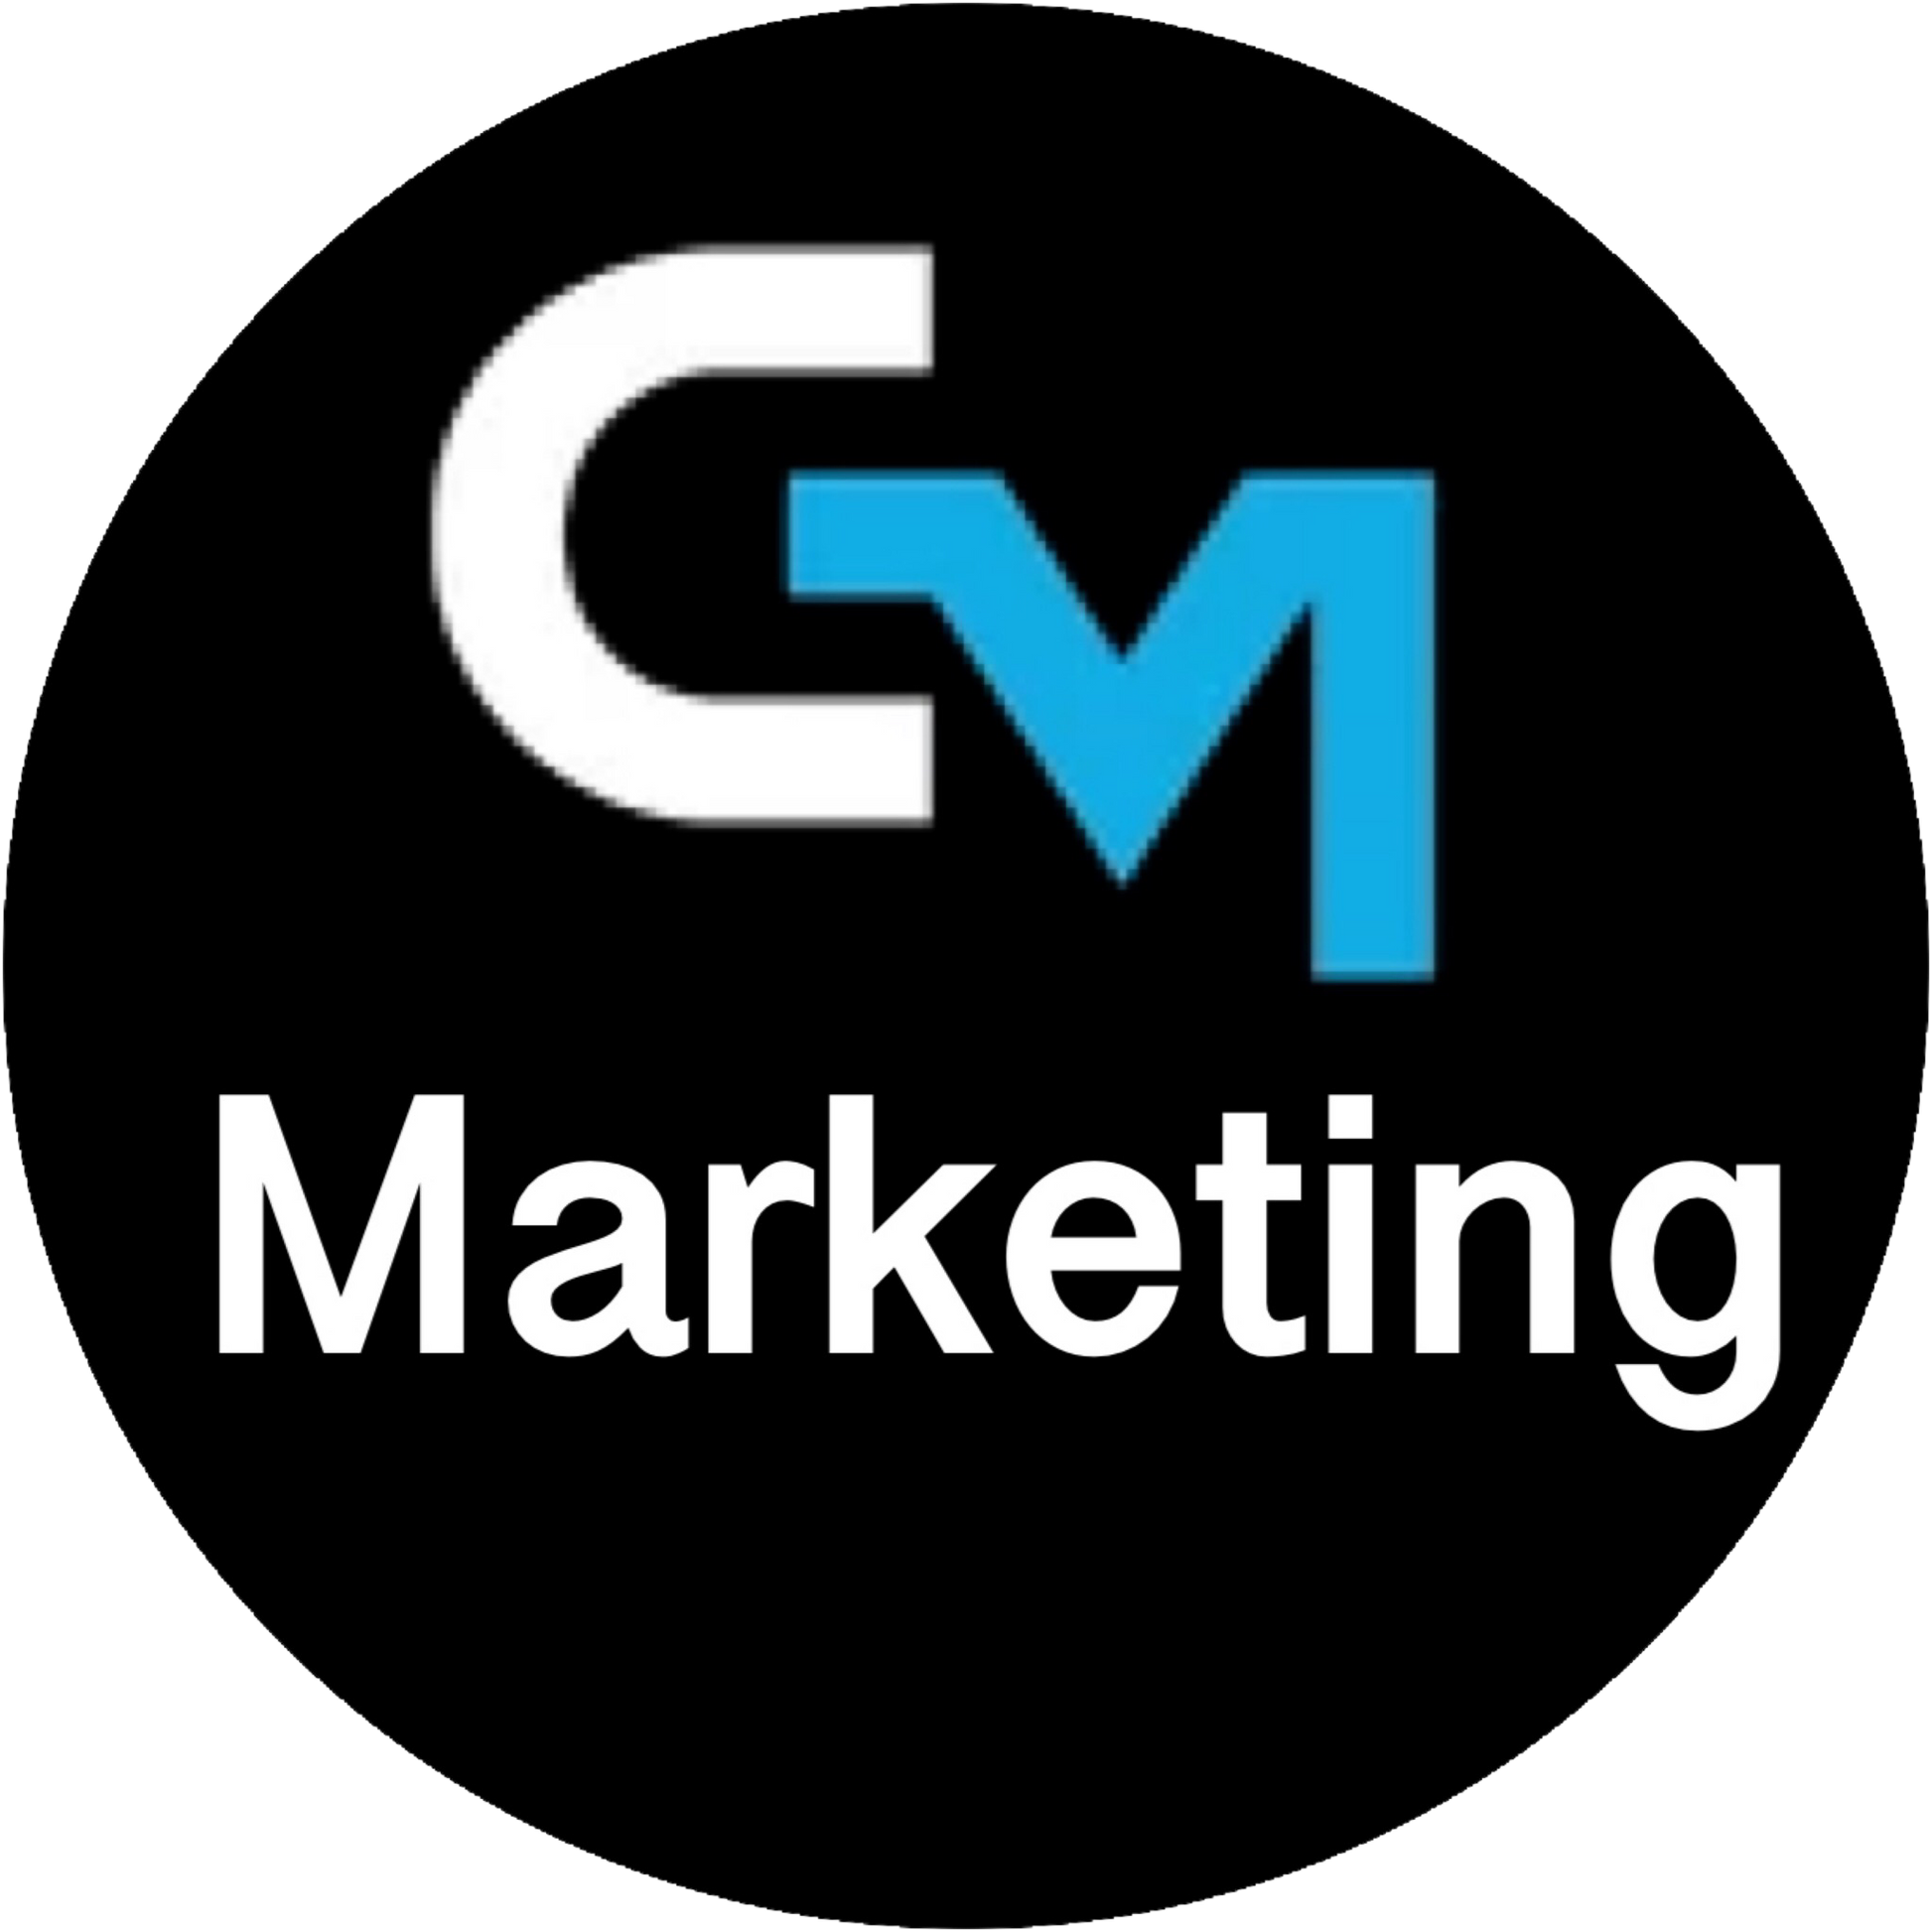 CM Marketing's expertise in delivering effective SEO solutions to enhance online visibility and drive organic traffic for businesses.